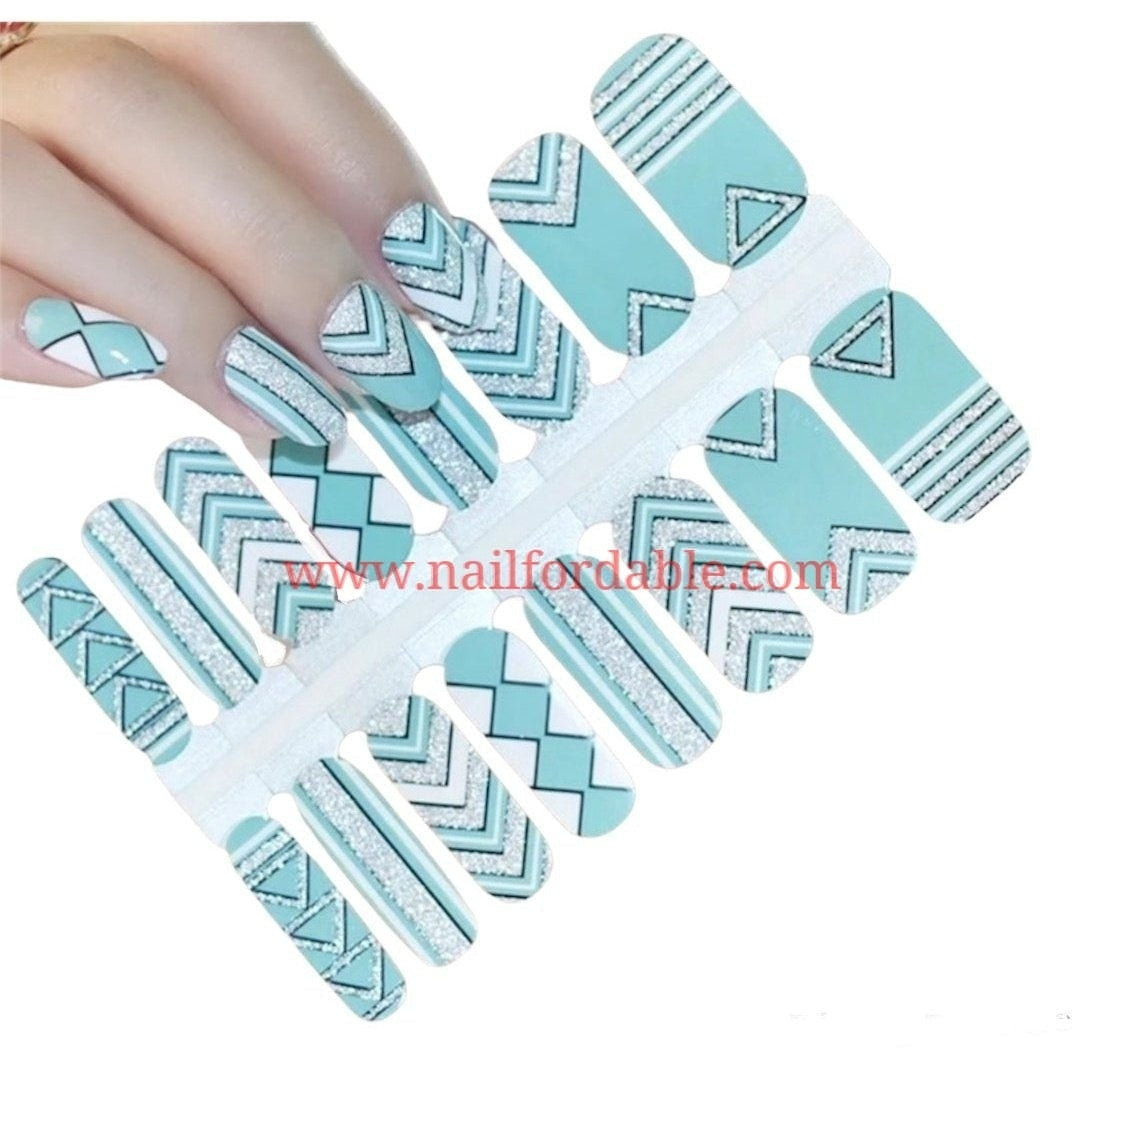 Egyptian Patterns Nail Wraps | Semi Cured Gel Wraps | Gel Nail Wraps |Nail Polish | Nail Stickers